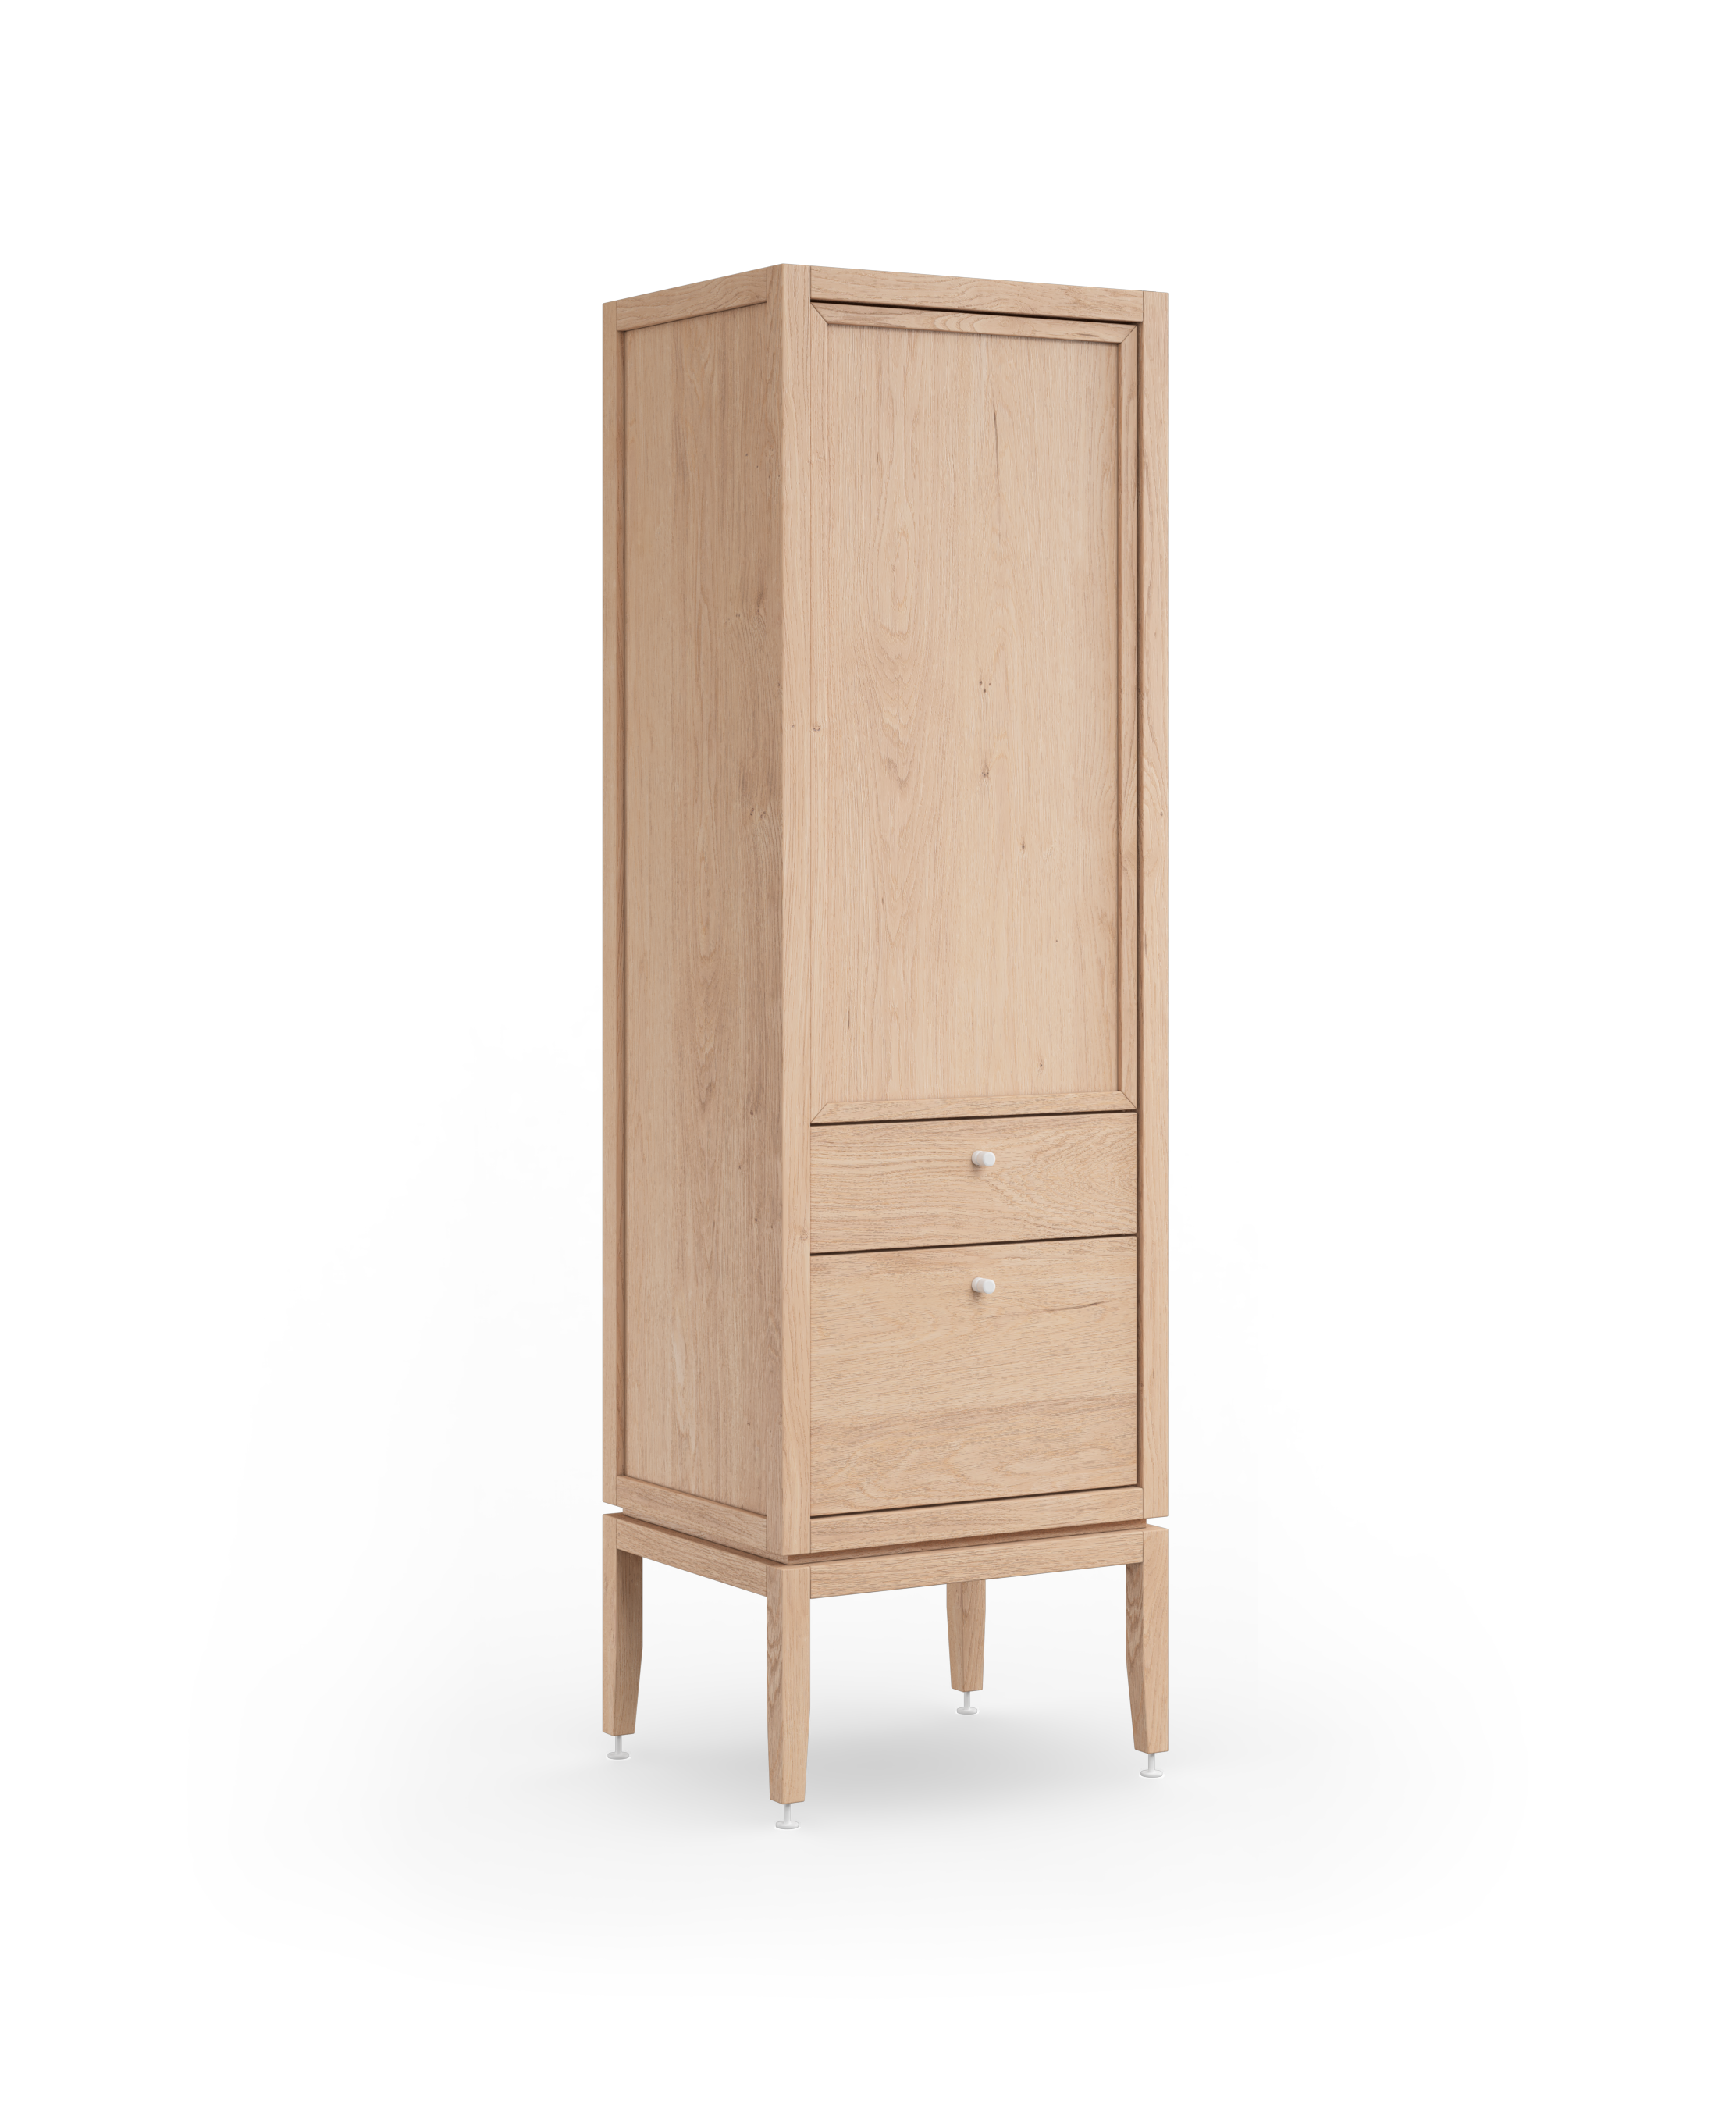 Coquo modular bathroom dresser with one door and two drawers in natural oak with metal handles.